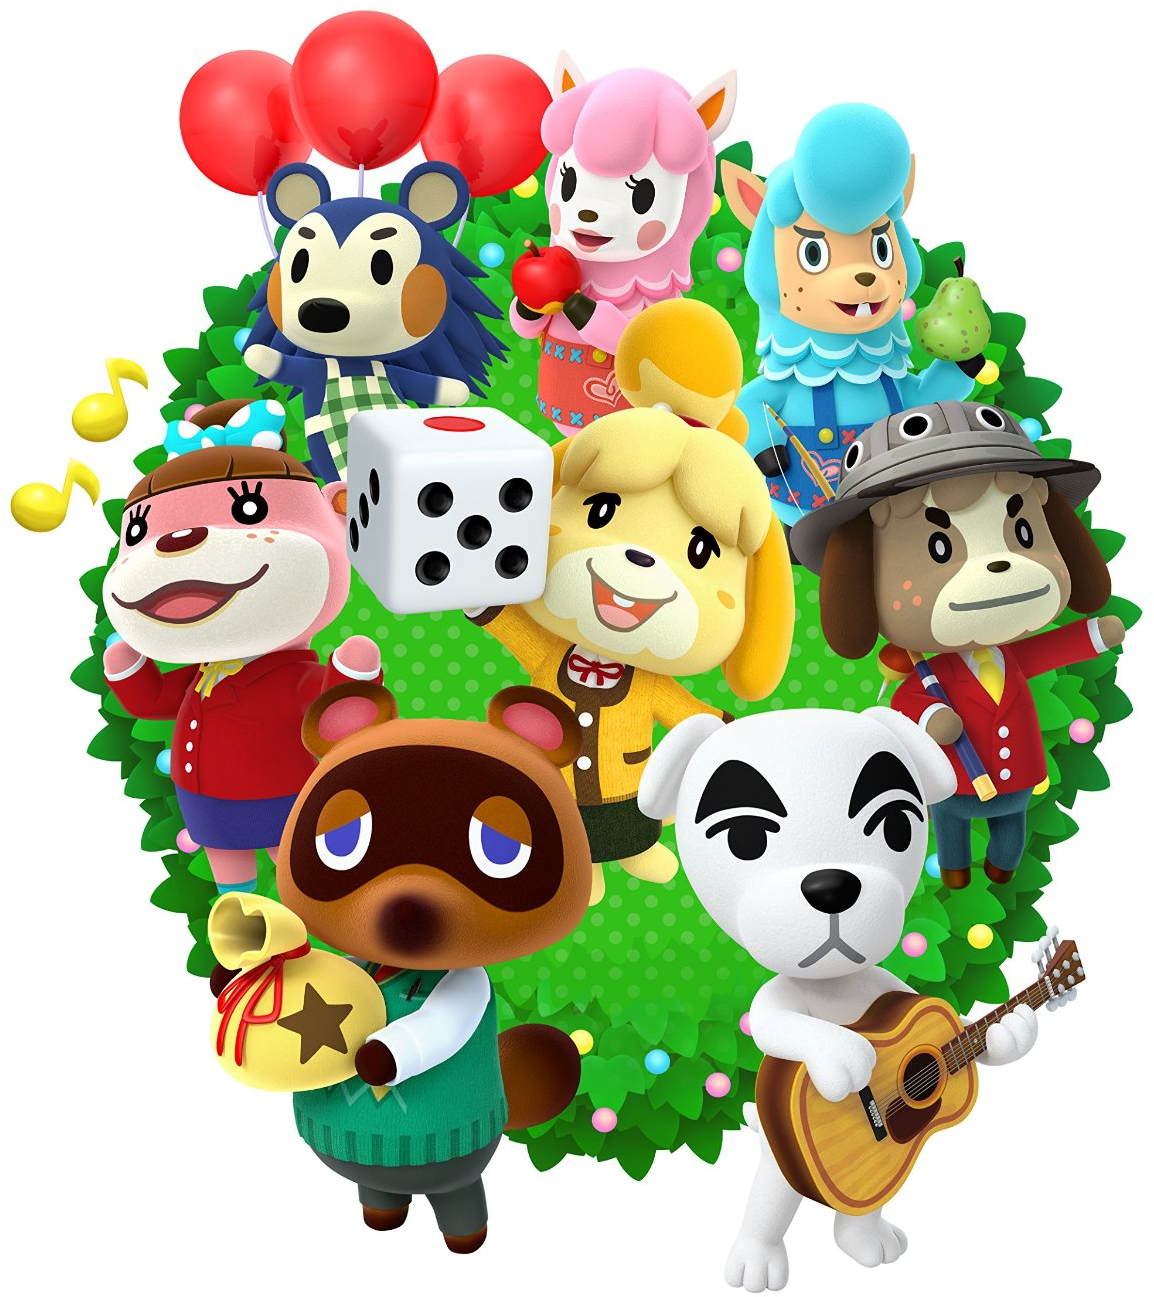 Albums 101+ Images Pictures Of Animal Crossing Characters Superb